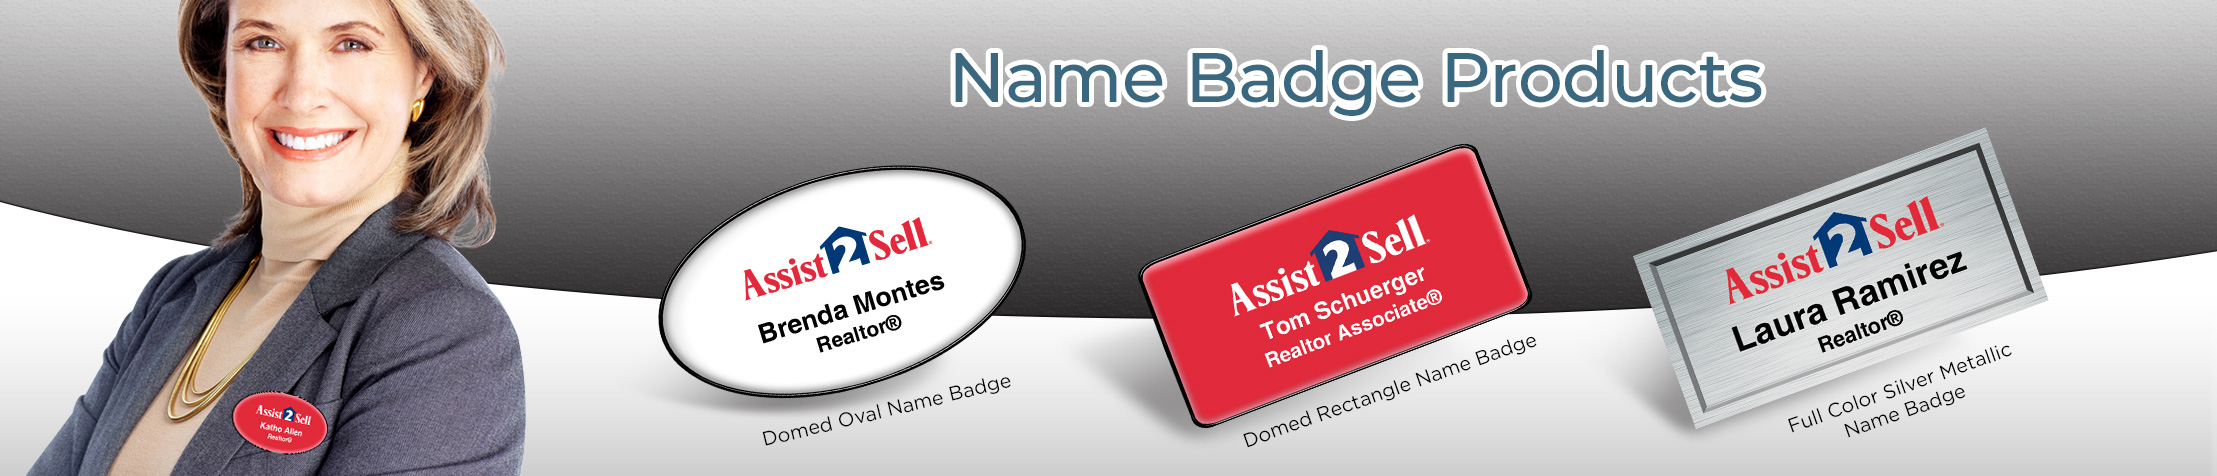 Assist2Sell Real Estate Name Badge Products - Assist2Sell Real Estate Name Tags for Realtors | BestPrintBuy.com